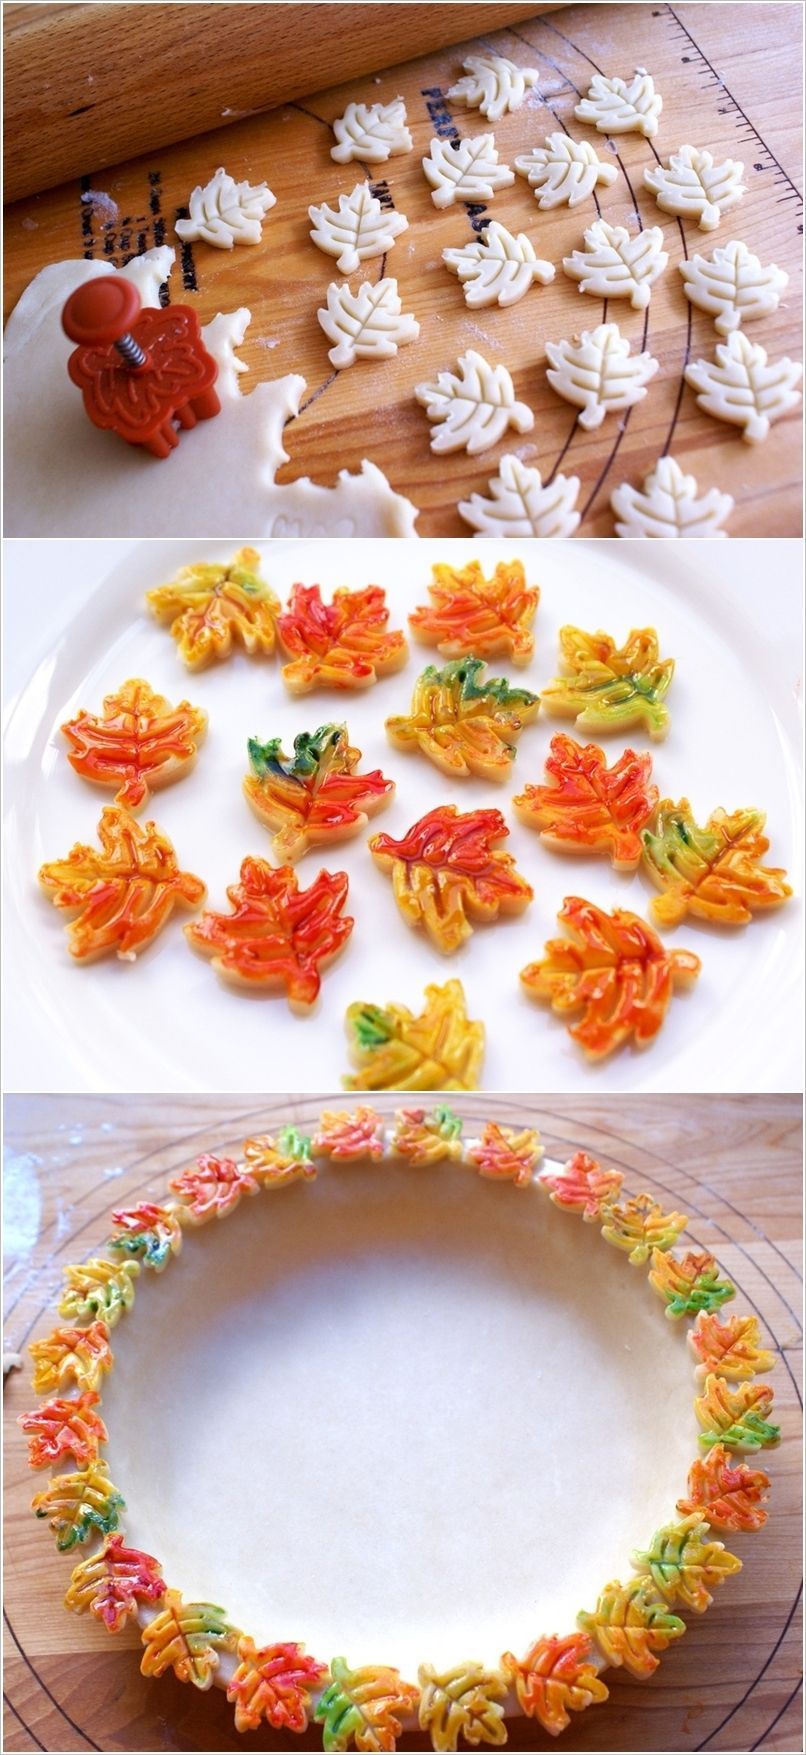 Creative Pie Crust Design Ideas for Your to Try